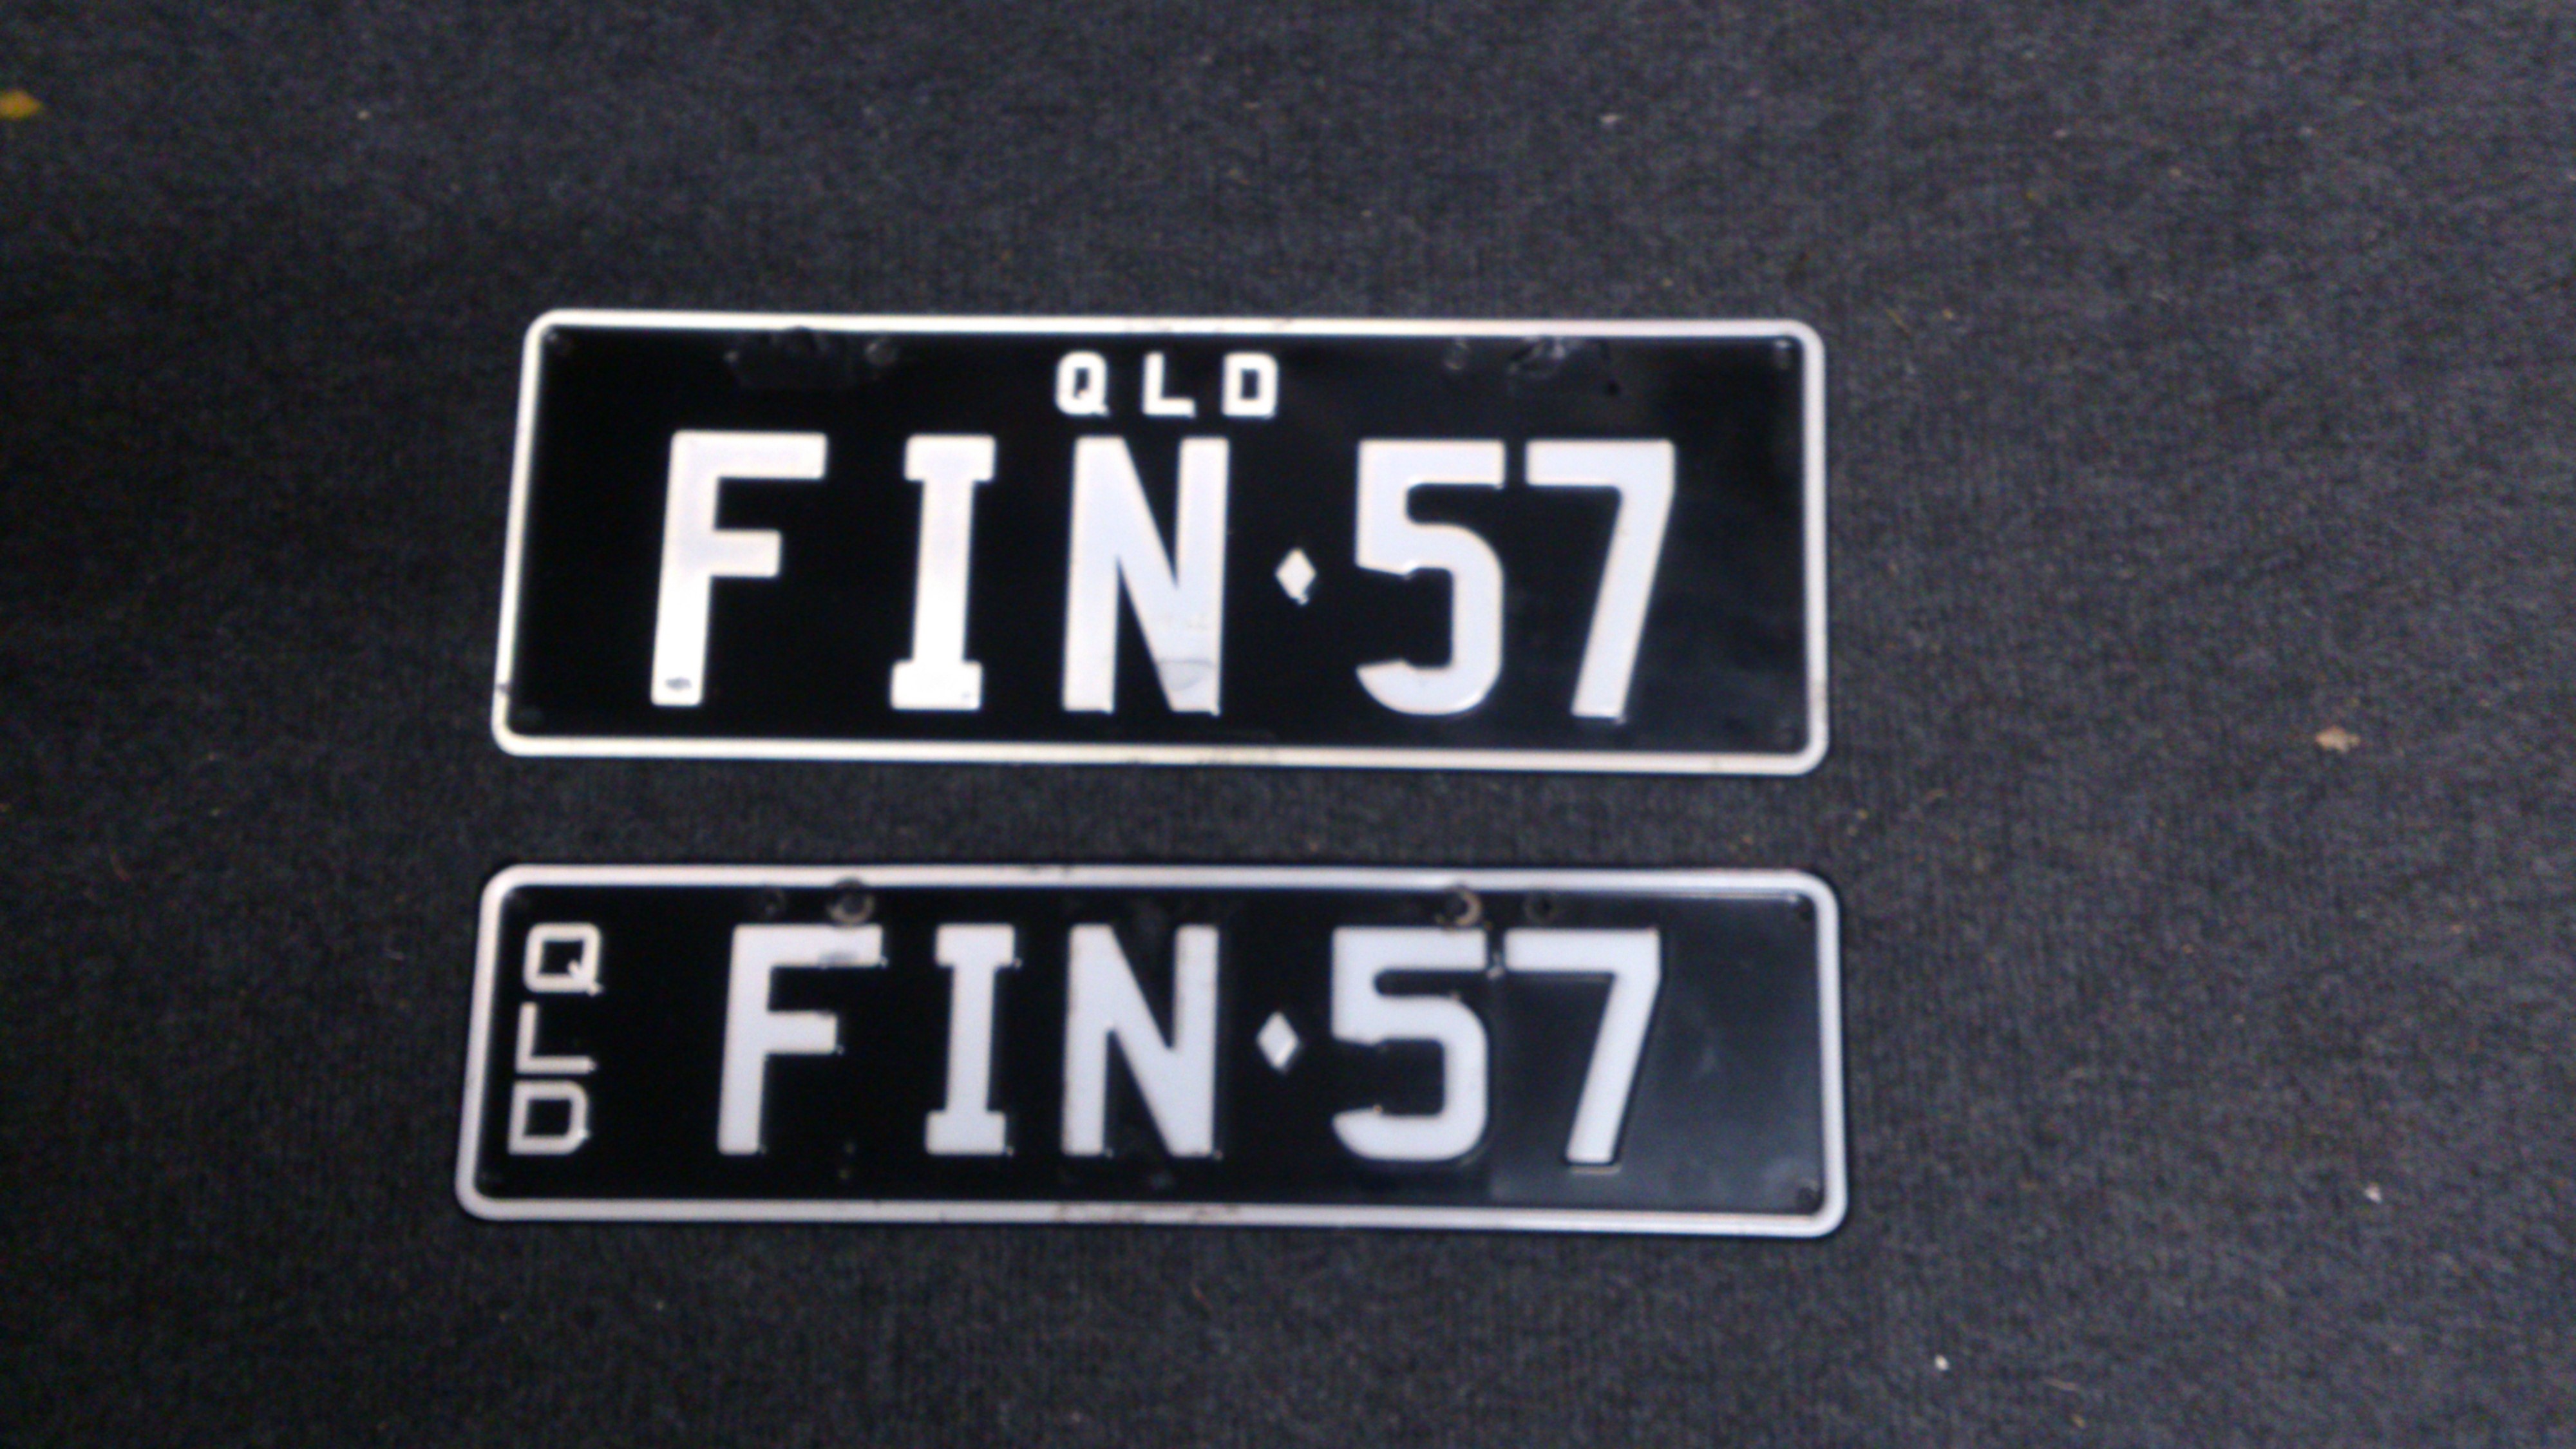 FIN 57 SUIT Chevy,chrysler,cadillac